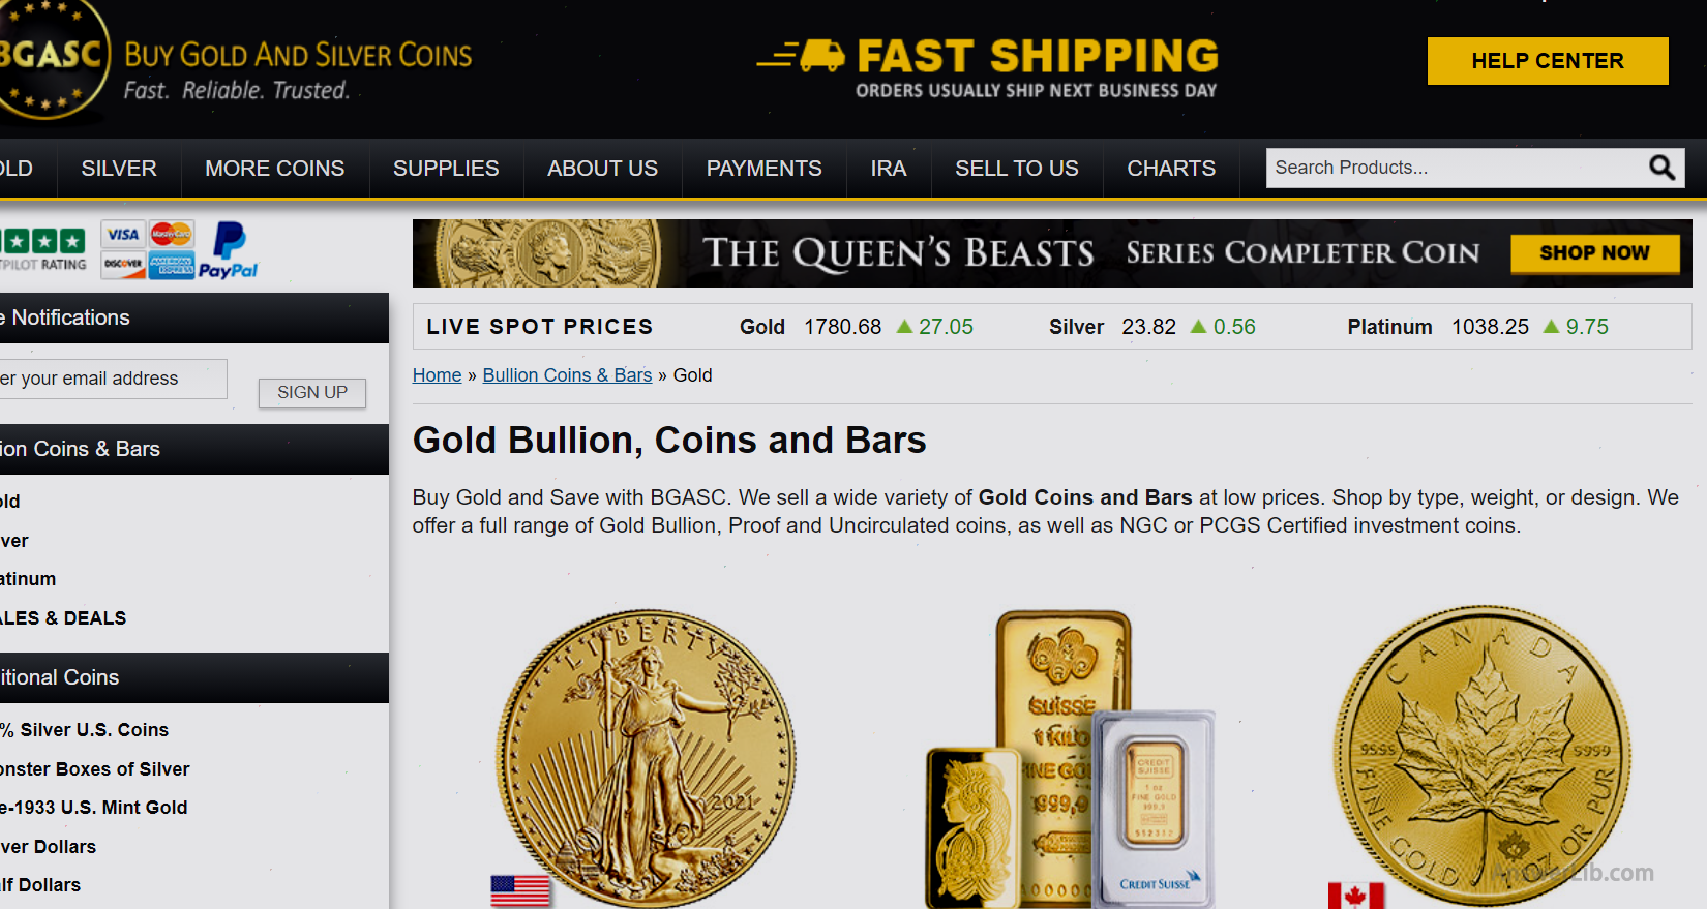 BUY GOLD AND SILVER COINS